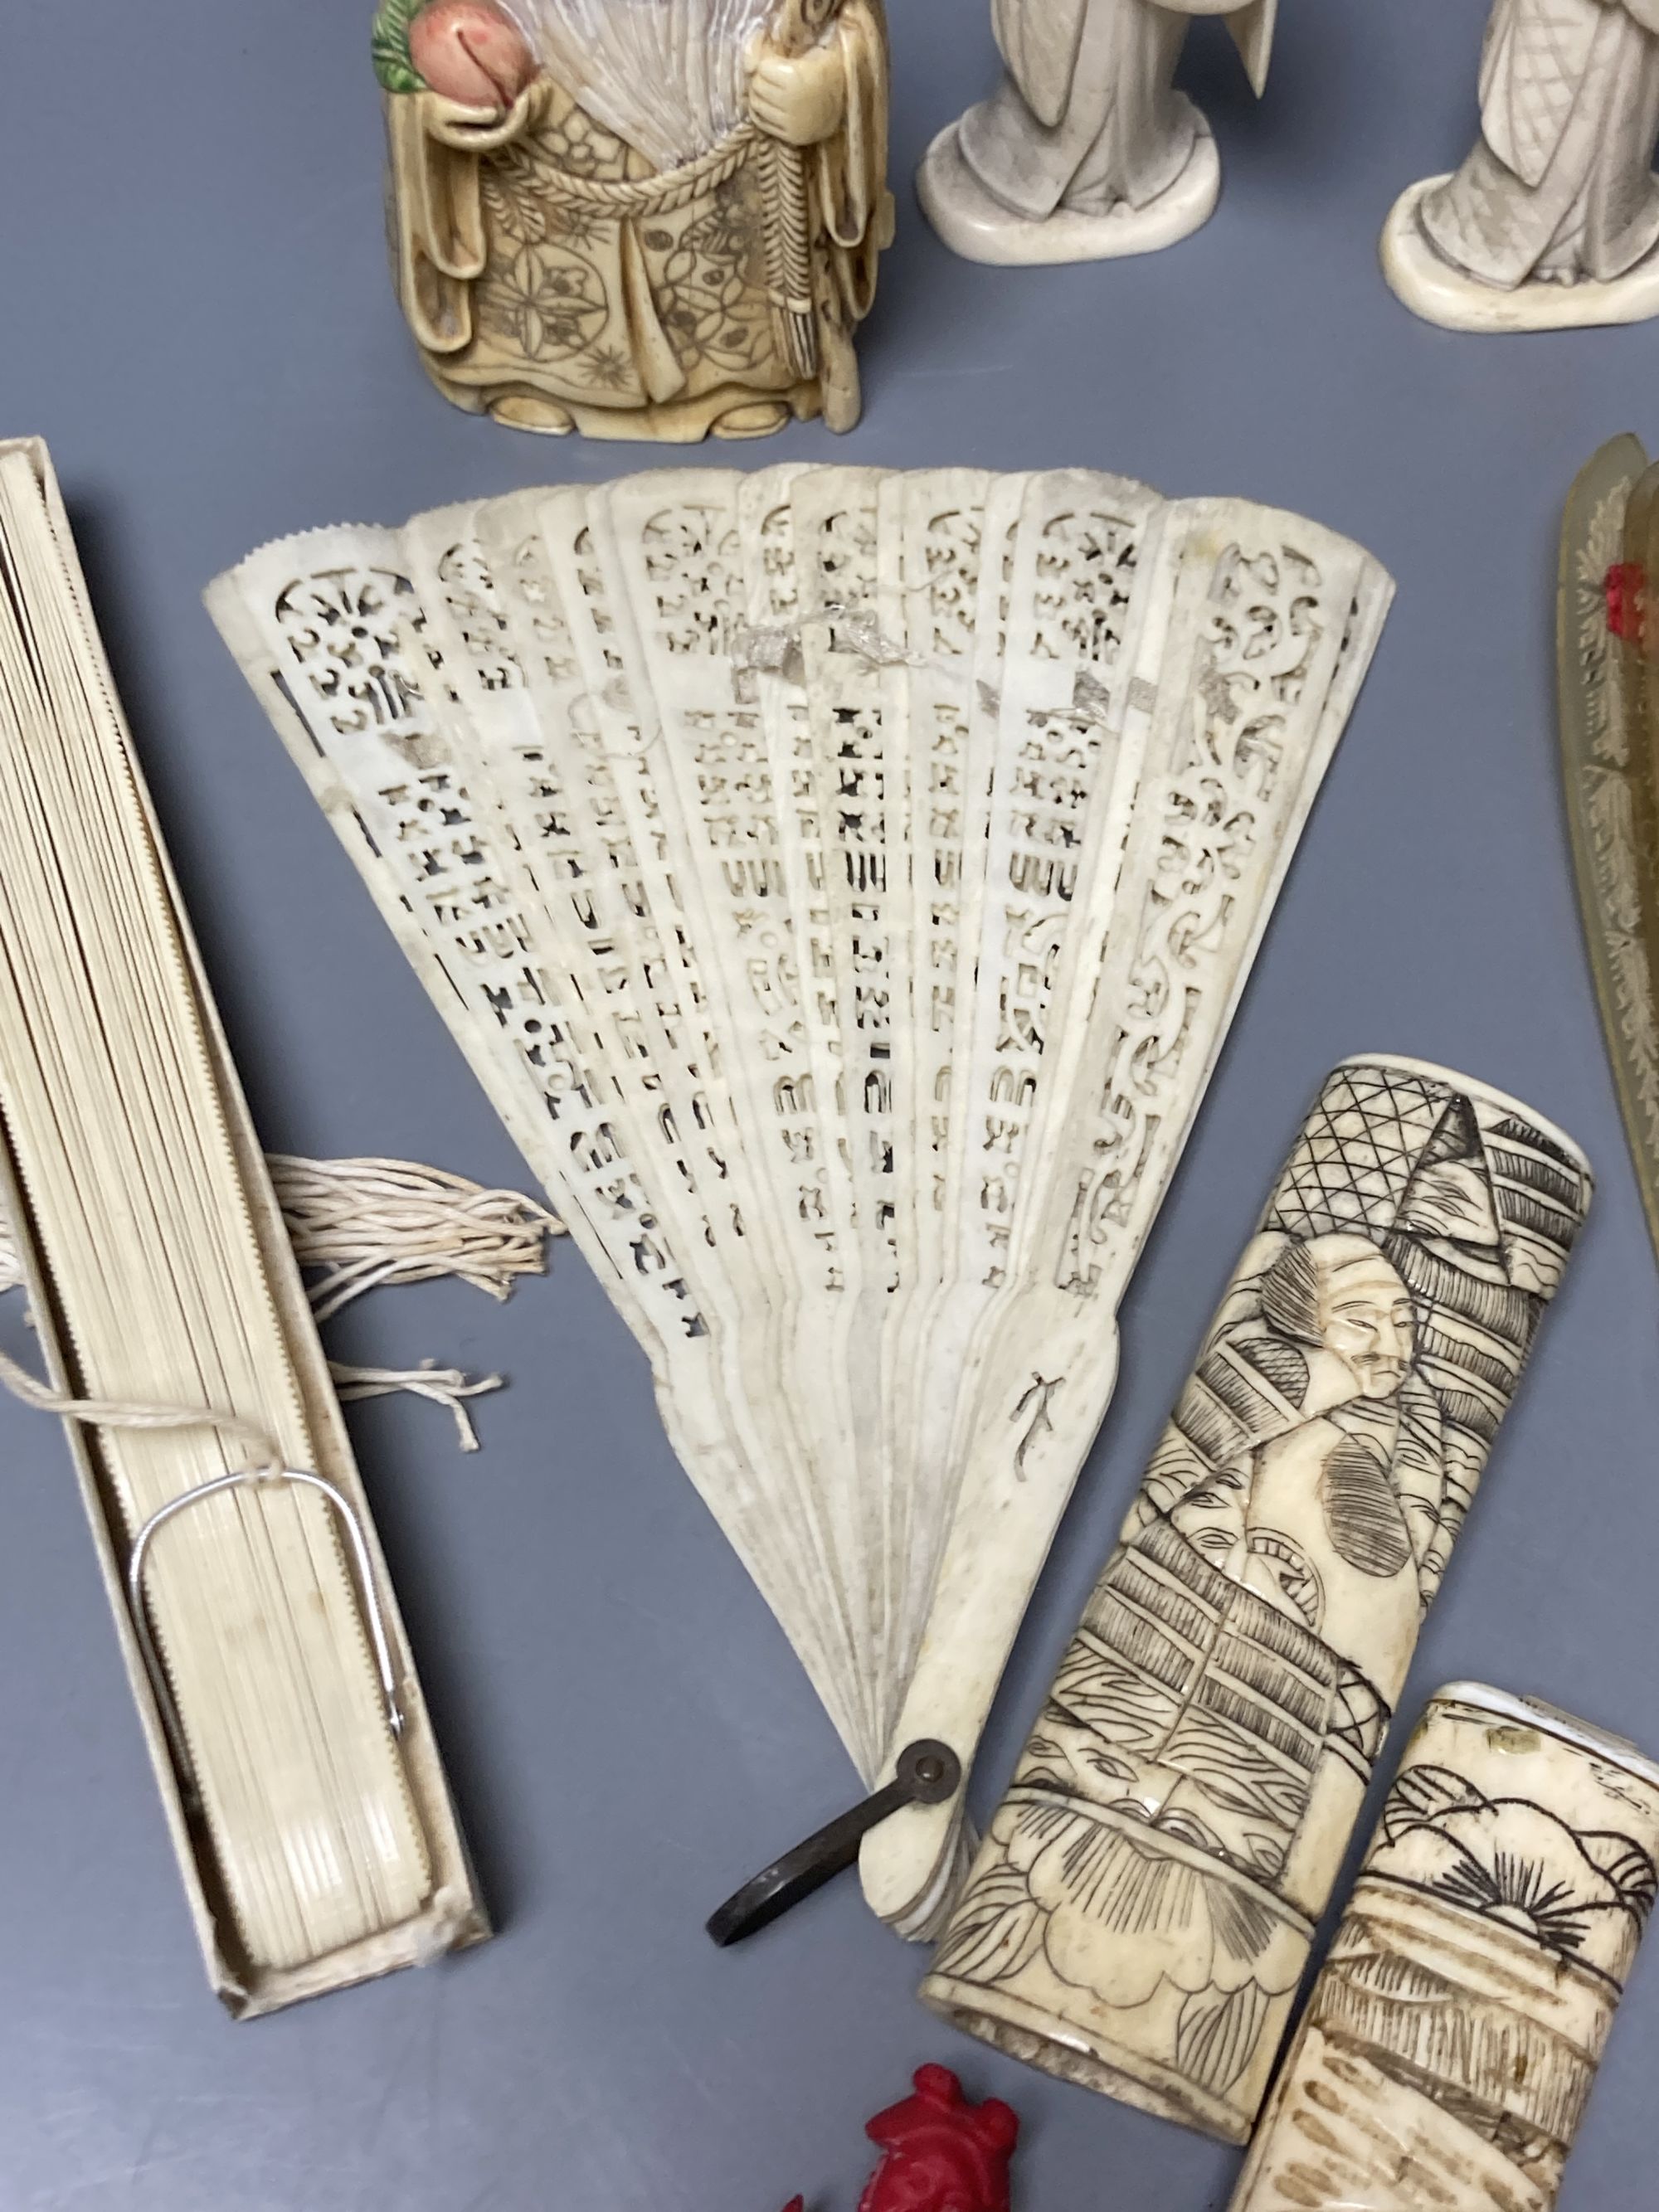 A quantity of bone and ivory carvings including fans and figures